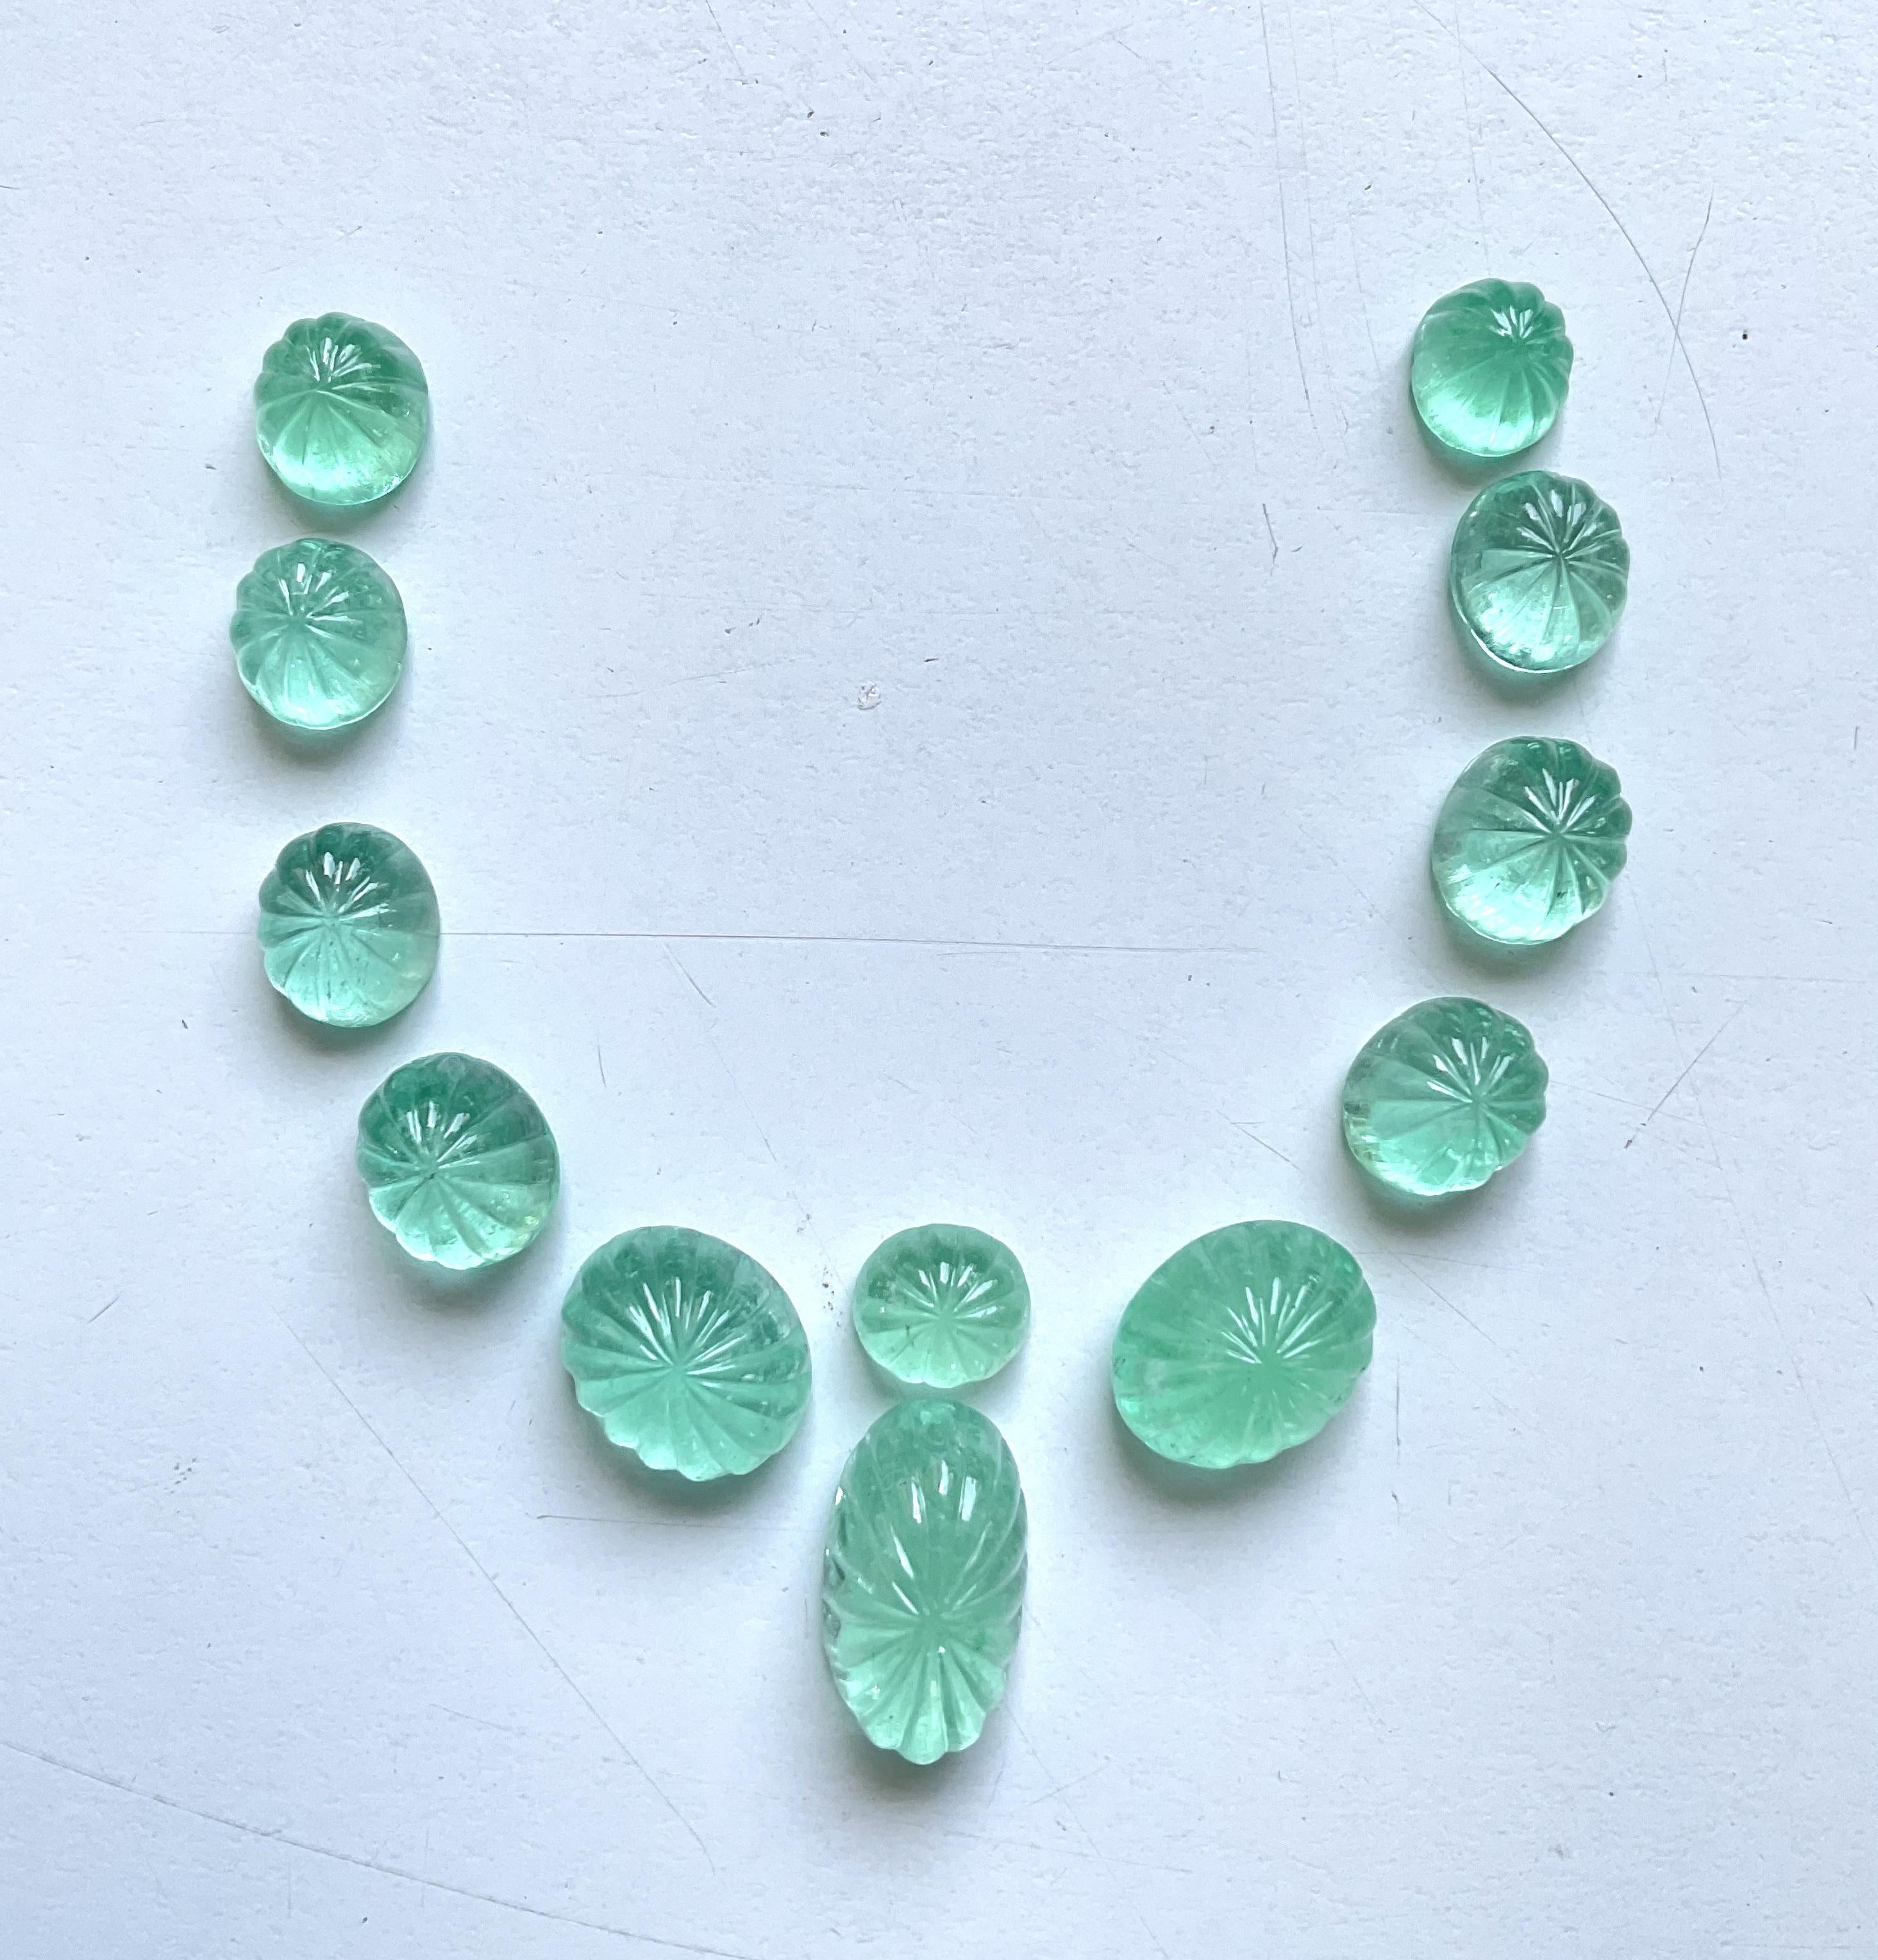 60.23 Carats Top Colombian Emerald Carved Cabochon For Jewelry Natural Gems
Gemstone - Emerald
Weight - 60.23 carats
Shape - Carved Cabochon
Quantity - 12 Pieces